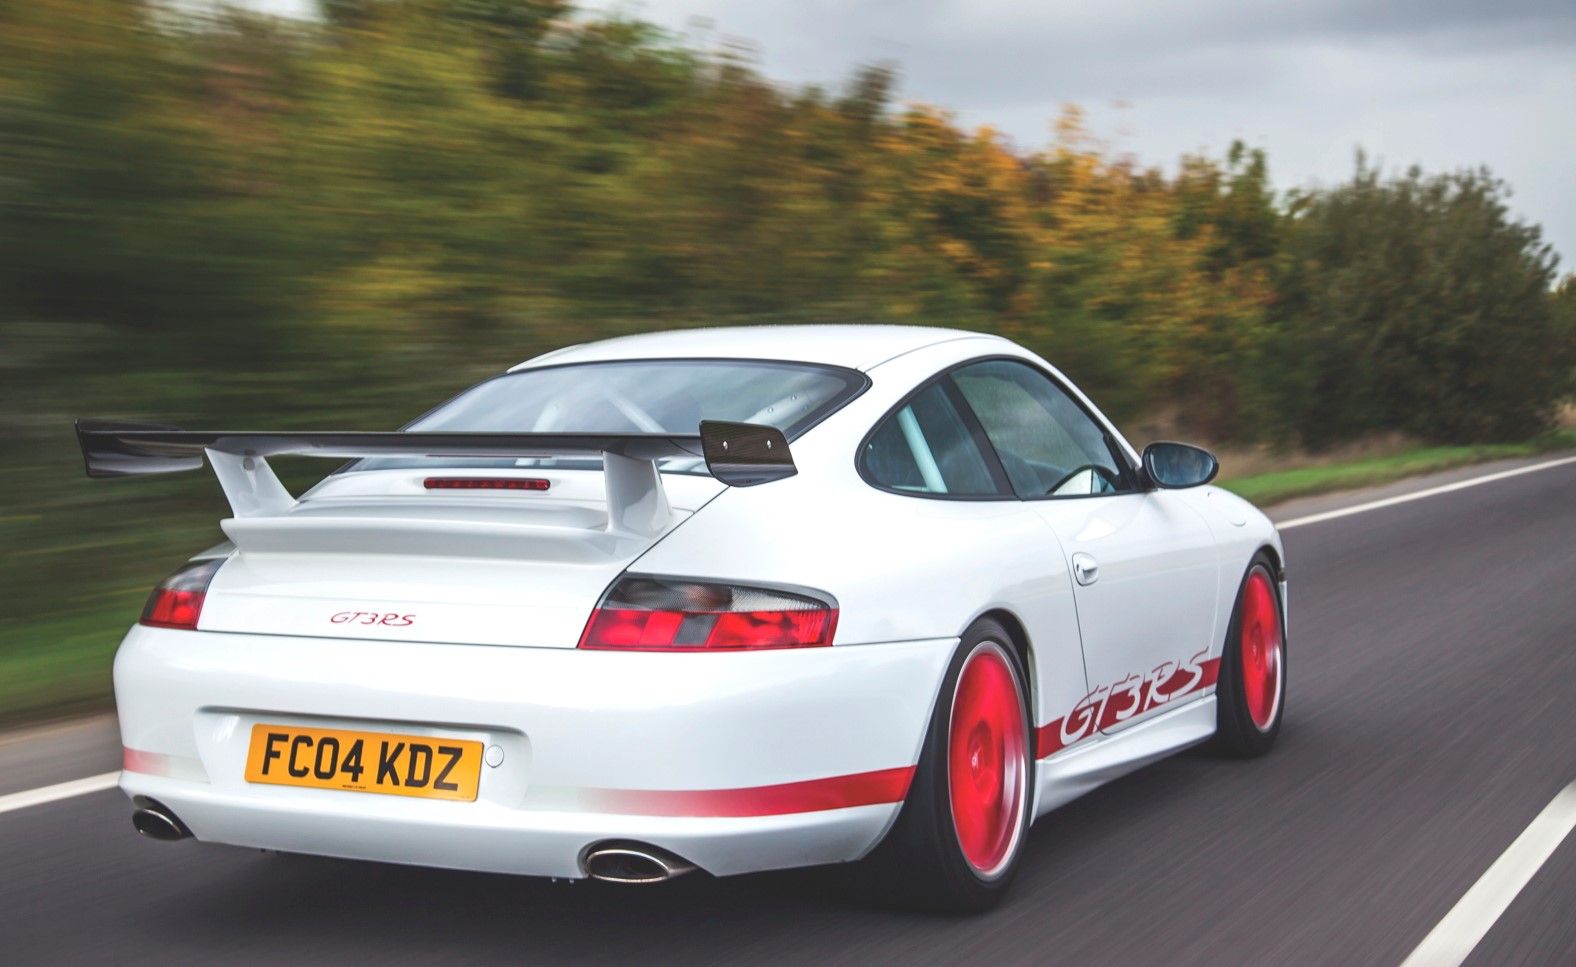 Porsche 996 GT3 RS on the road